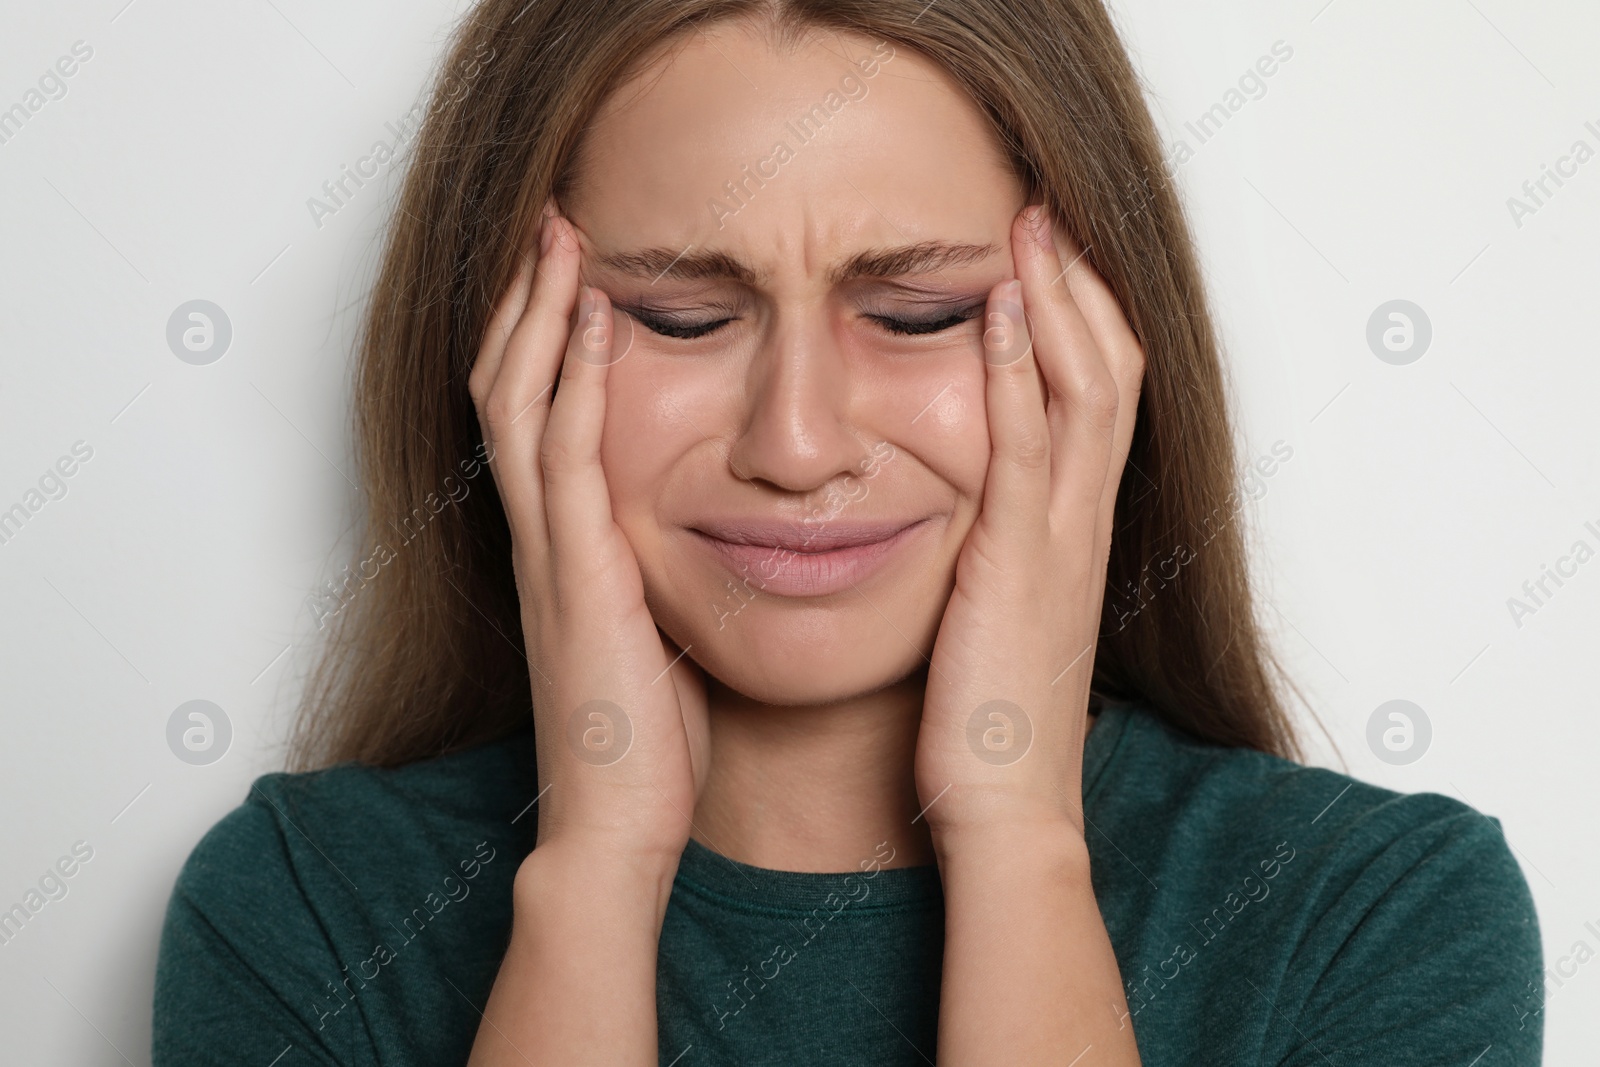 Photo of Crying young woman on light background. Stop violence